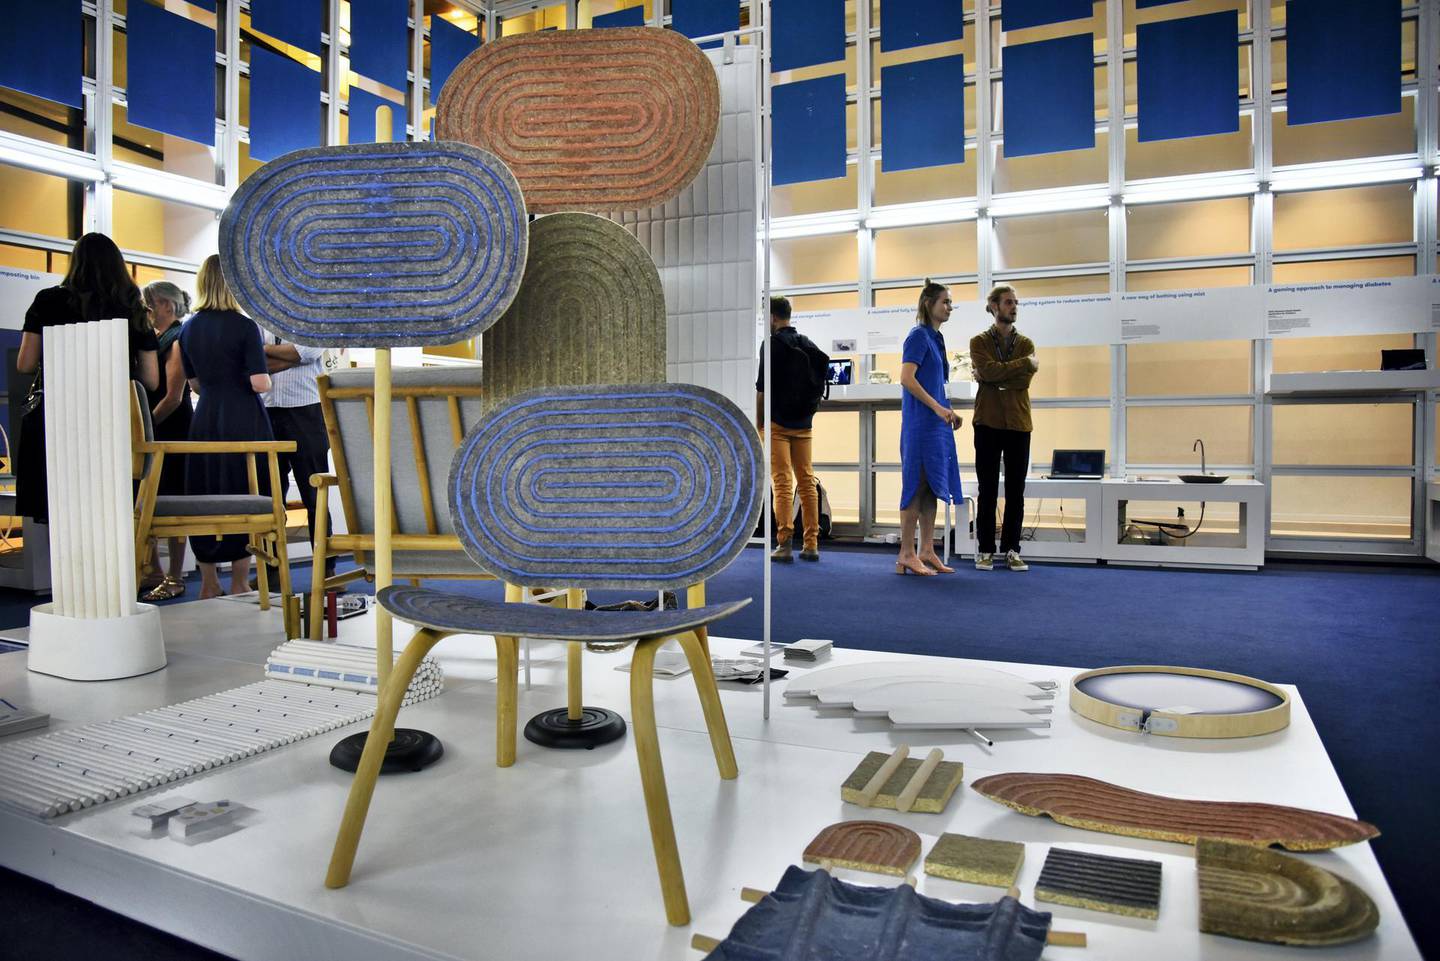 Inventions by graduates from universities around the world at the Global Grad Show during the Dubai Design Week at the Dubai Design District, Dubai, UAE, on Monday, Nov. 11, 2019. (Photos by Shruti Jain - The National)